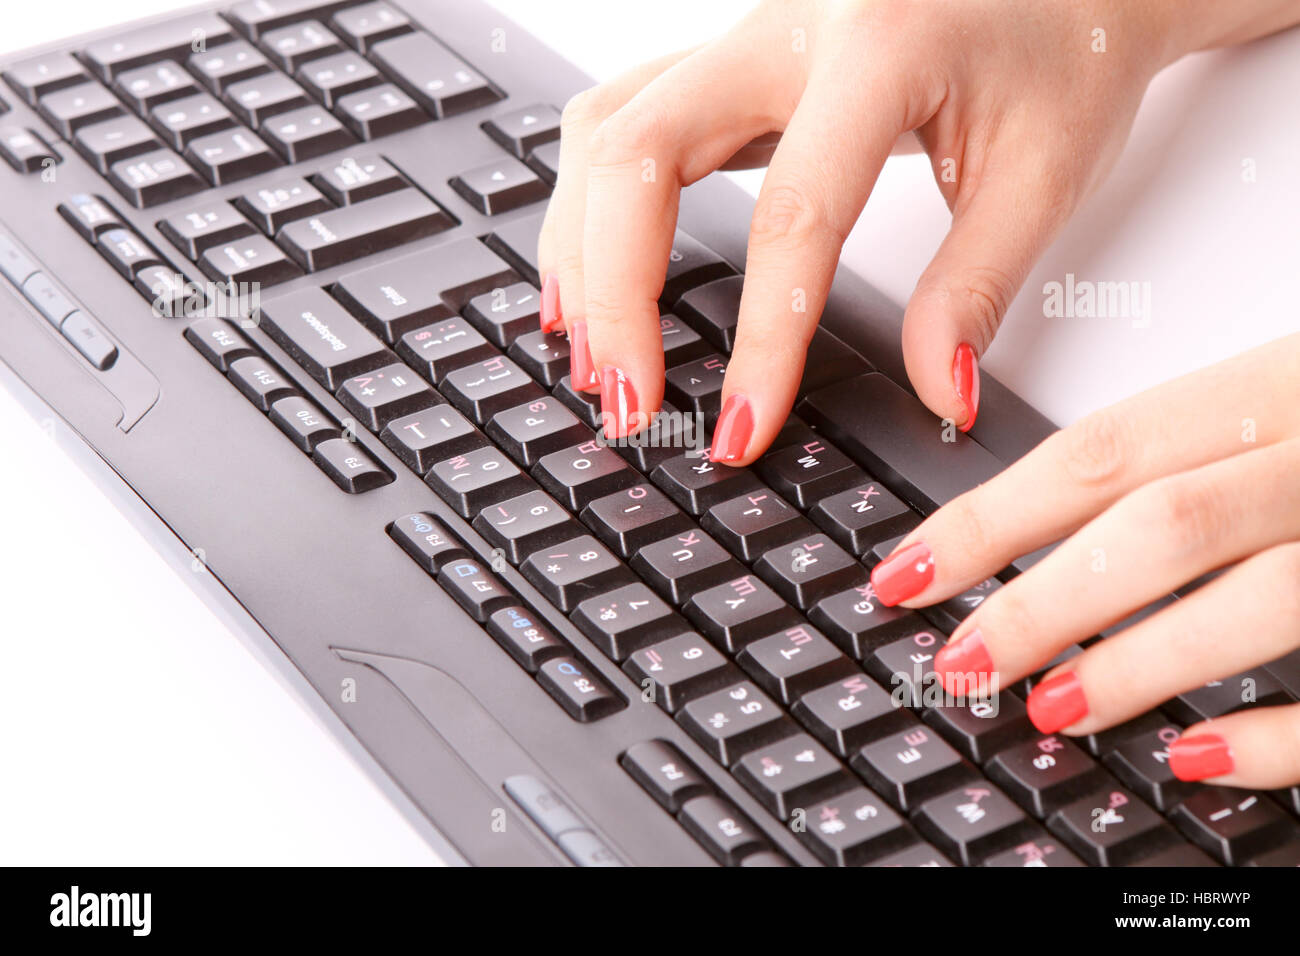 Woman fingers typing on keyboard Stock Photo